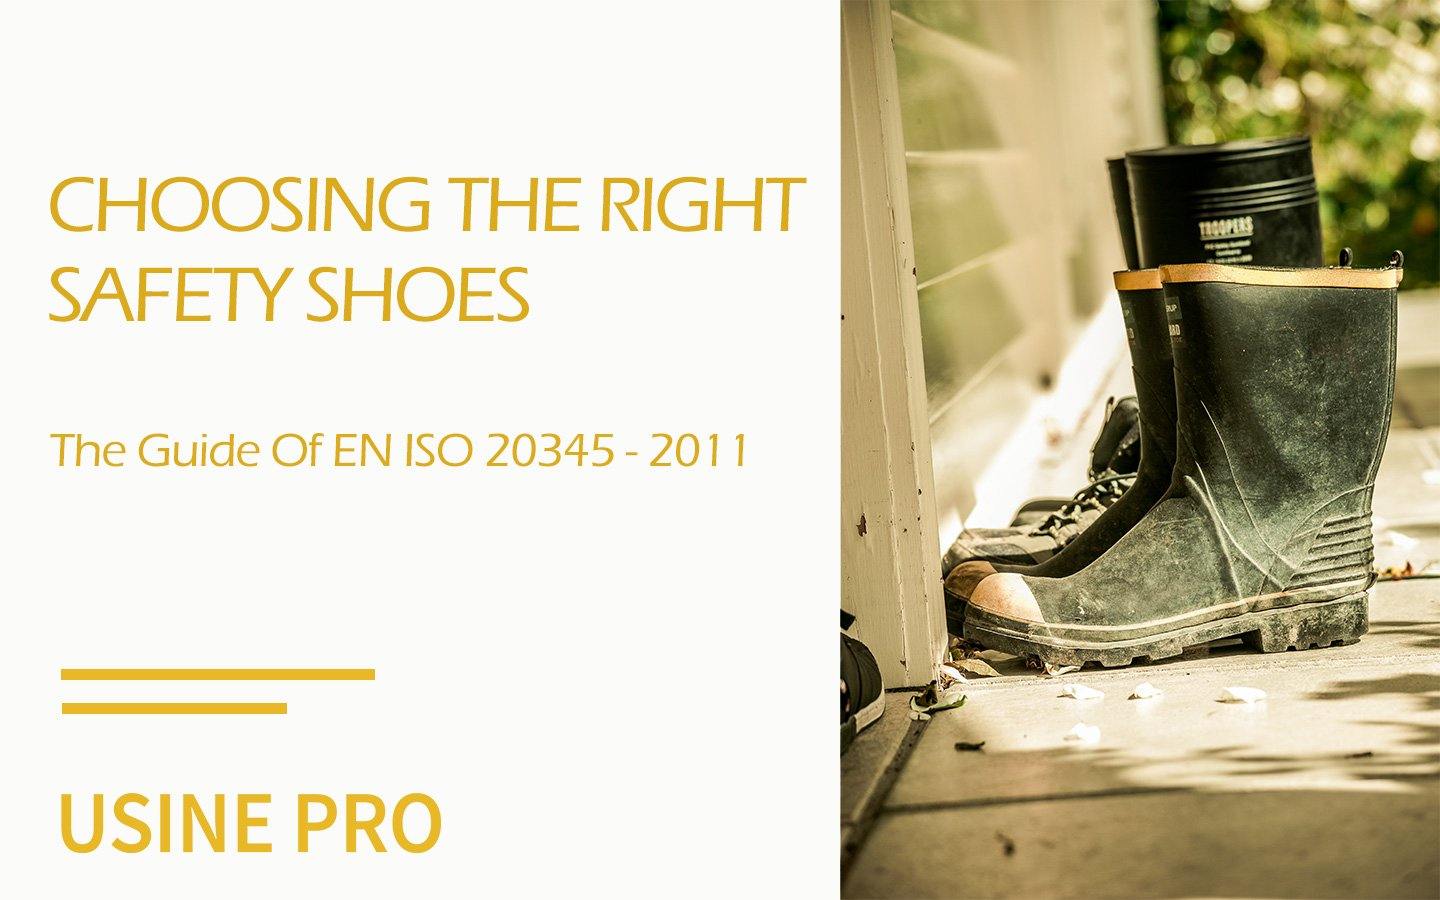 Choosing the right safety shoes - The Guide Of EN ISO 20345 - USINE PRO Footwear